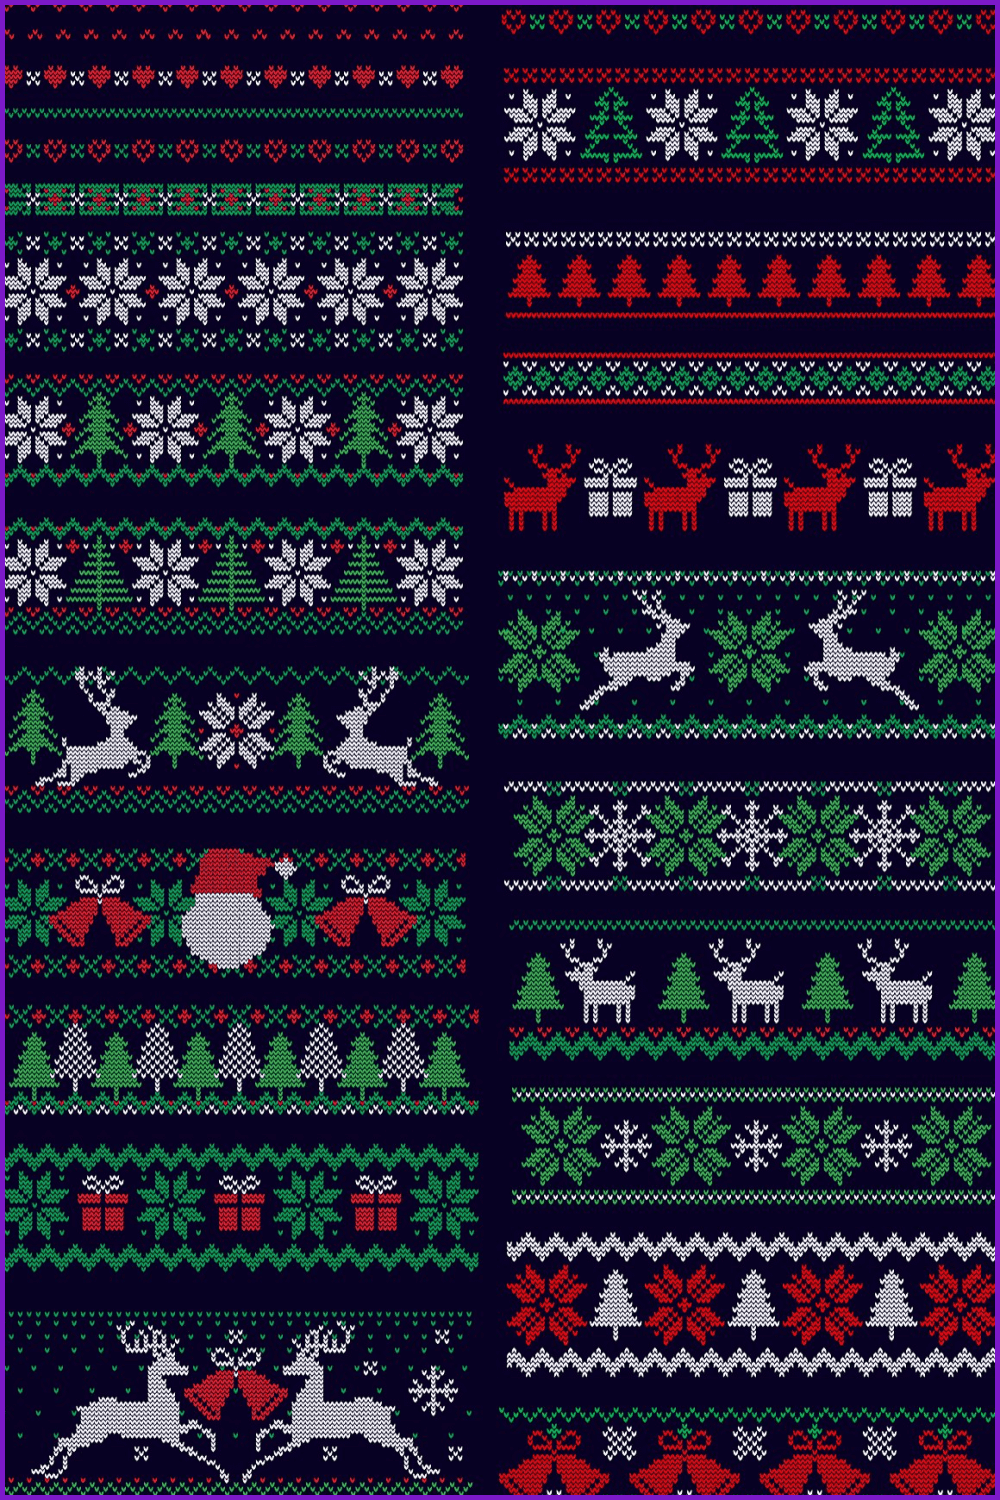 Collage of pixel deer, Christmas trees, gifts and snowflakes.